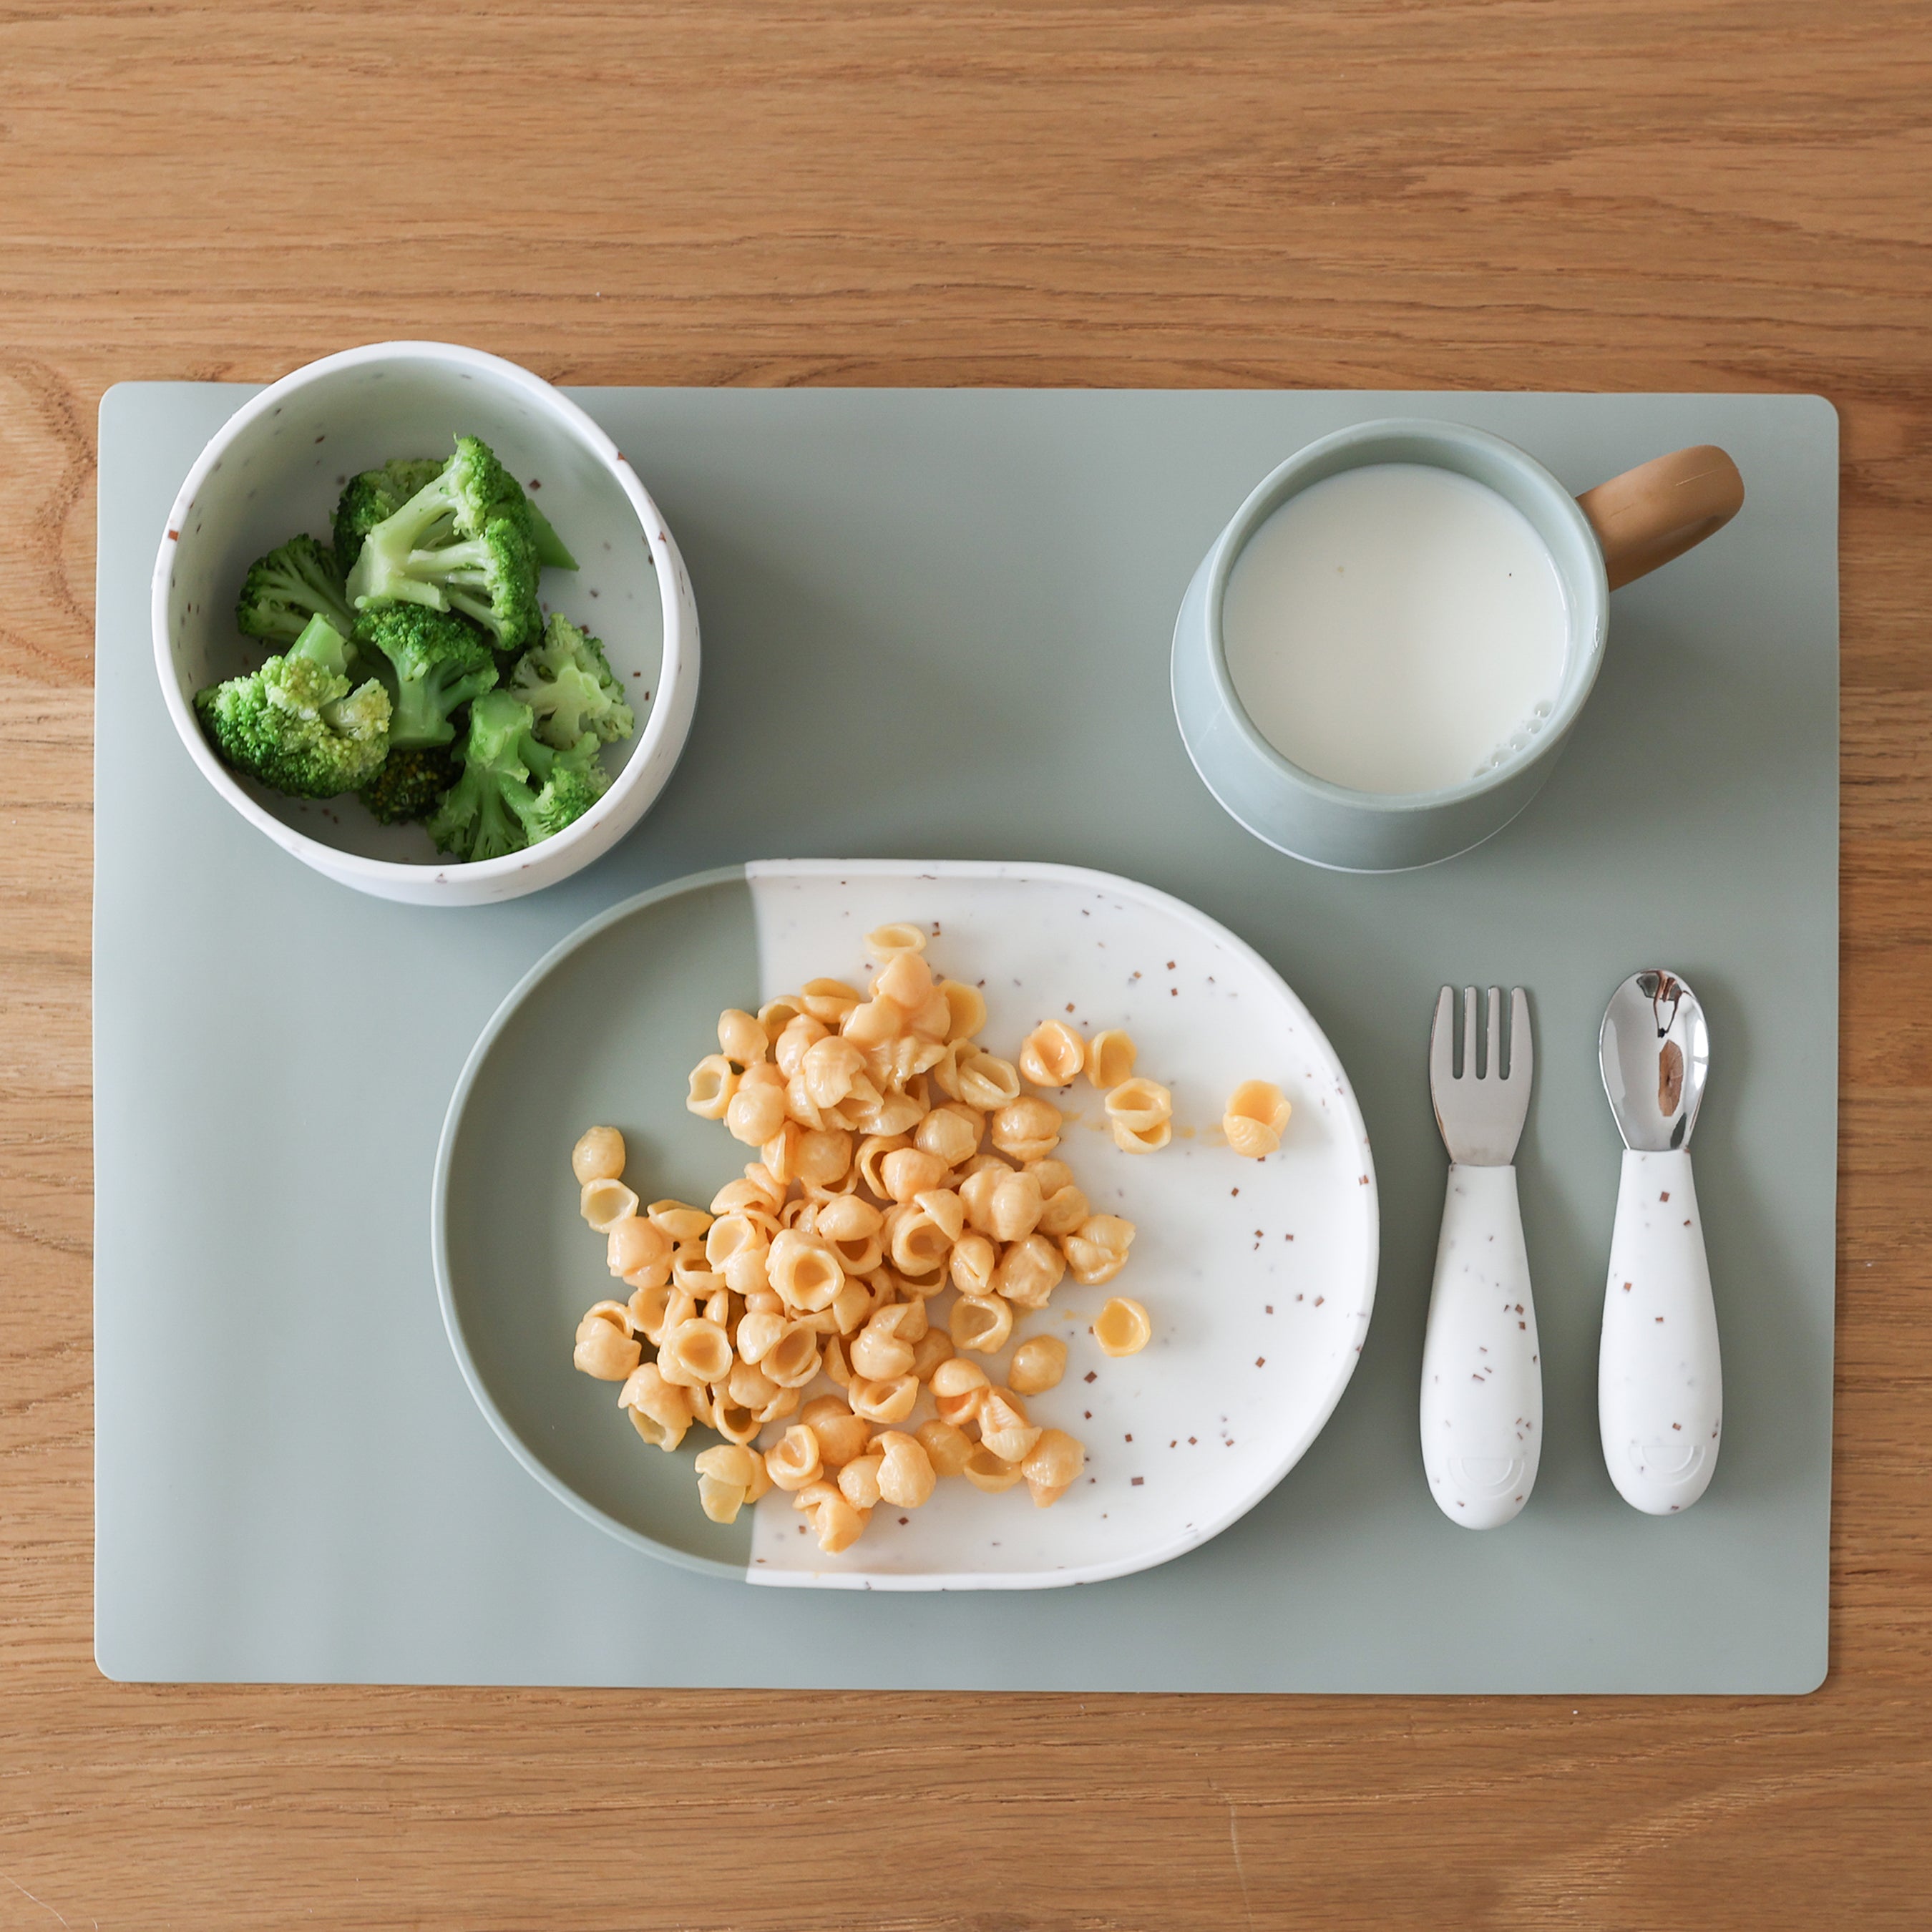 Large Silicone Placemat - Set of 2